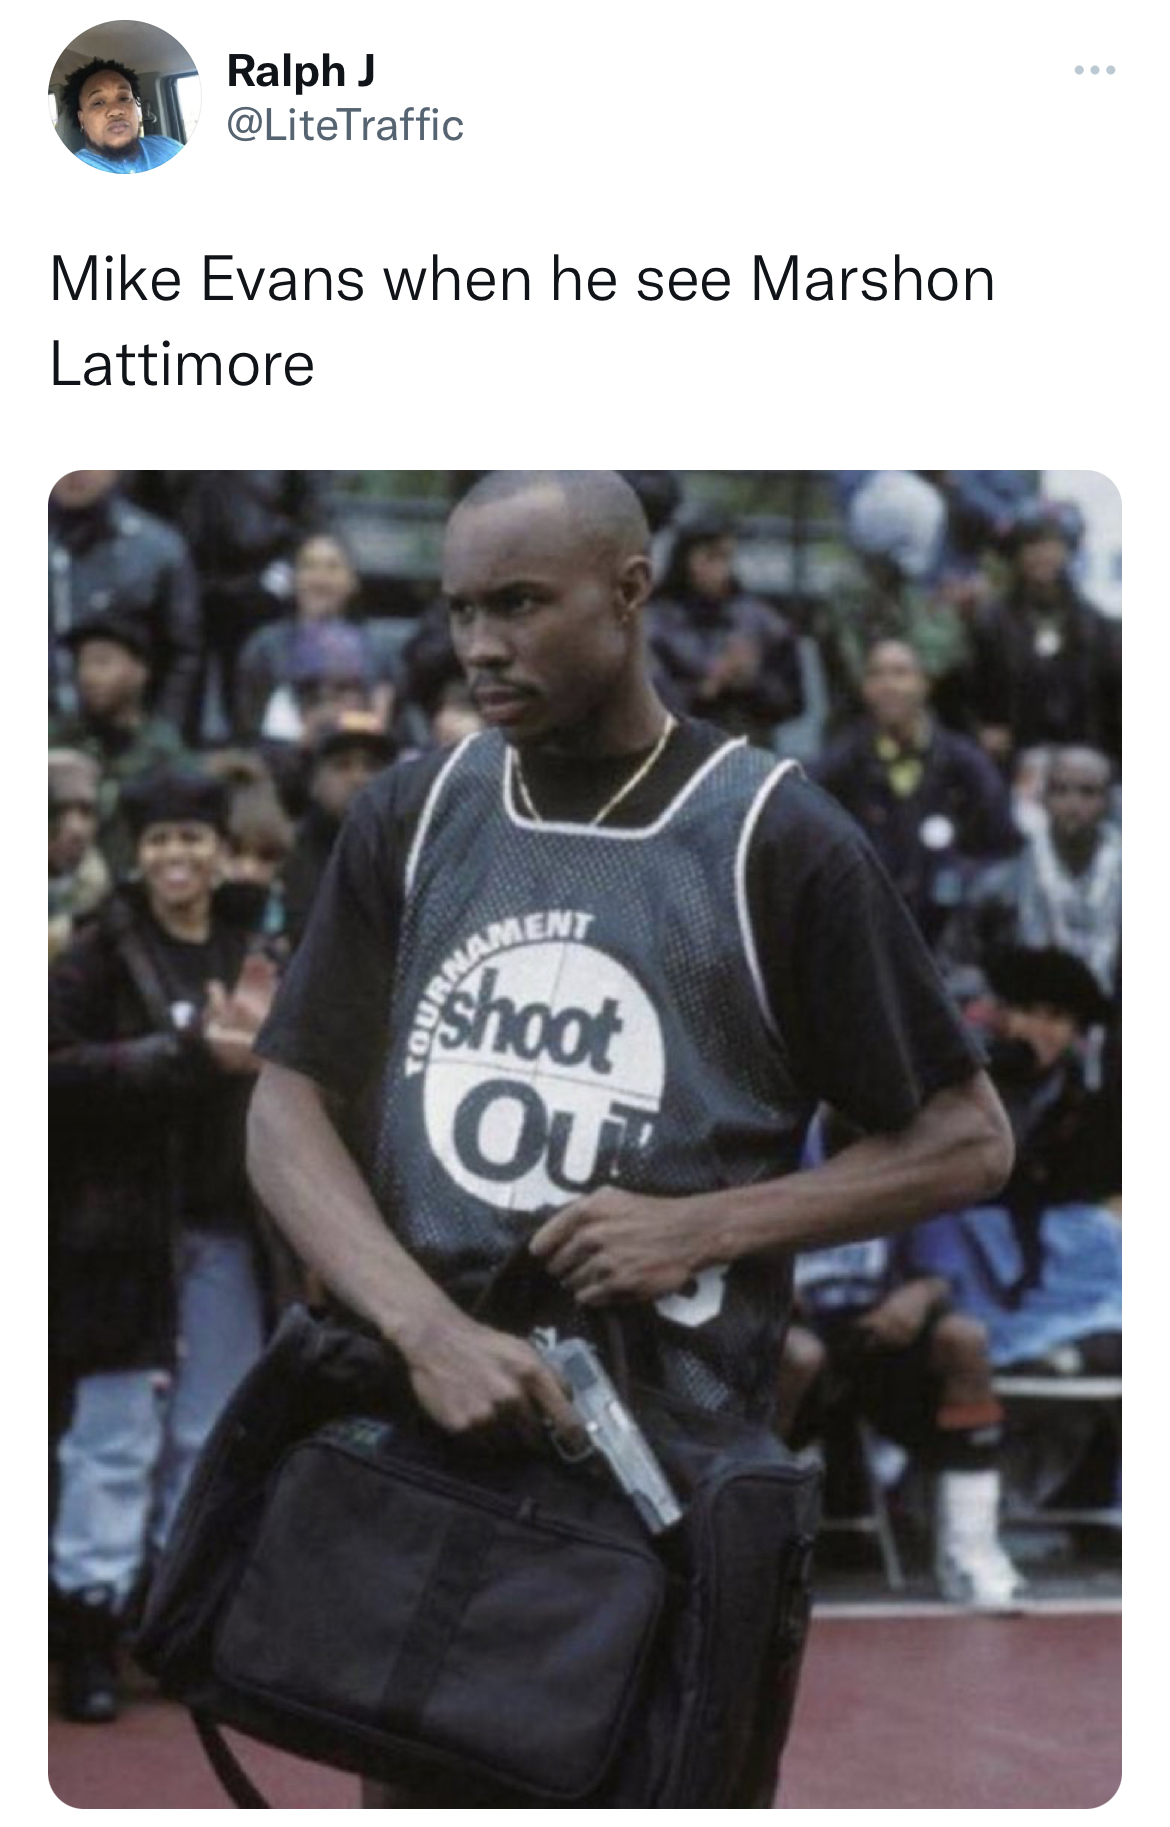 salty and savage nfl memes - above the rim shootout - Ralph J Mike Evans when he see Marshon Lattimore Ament shoot Out